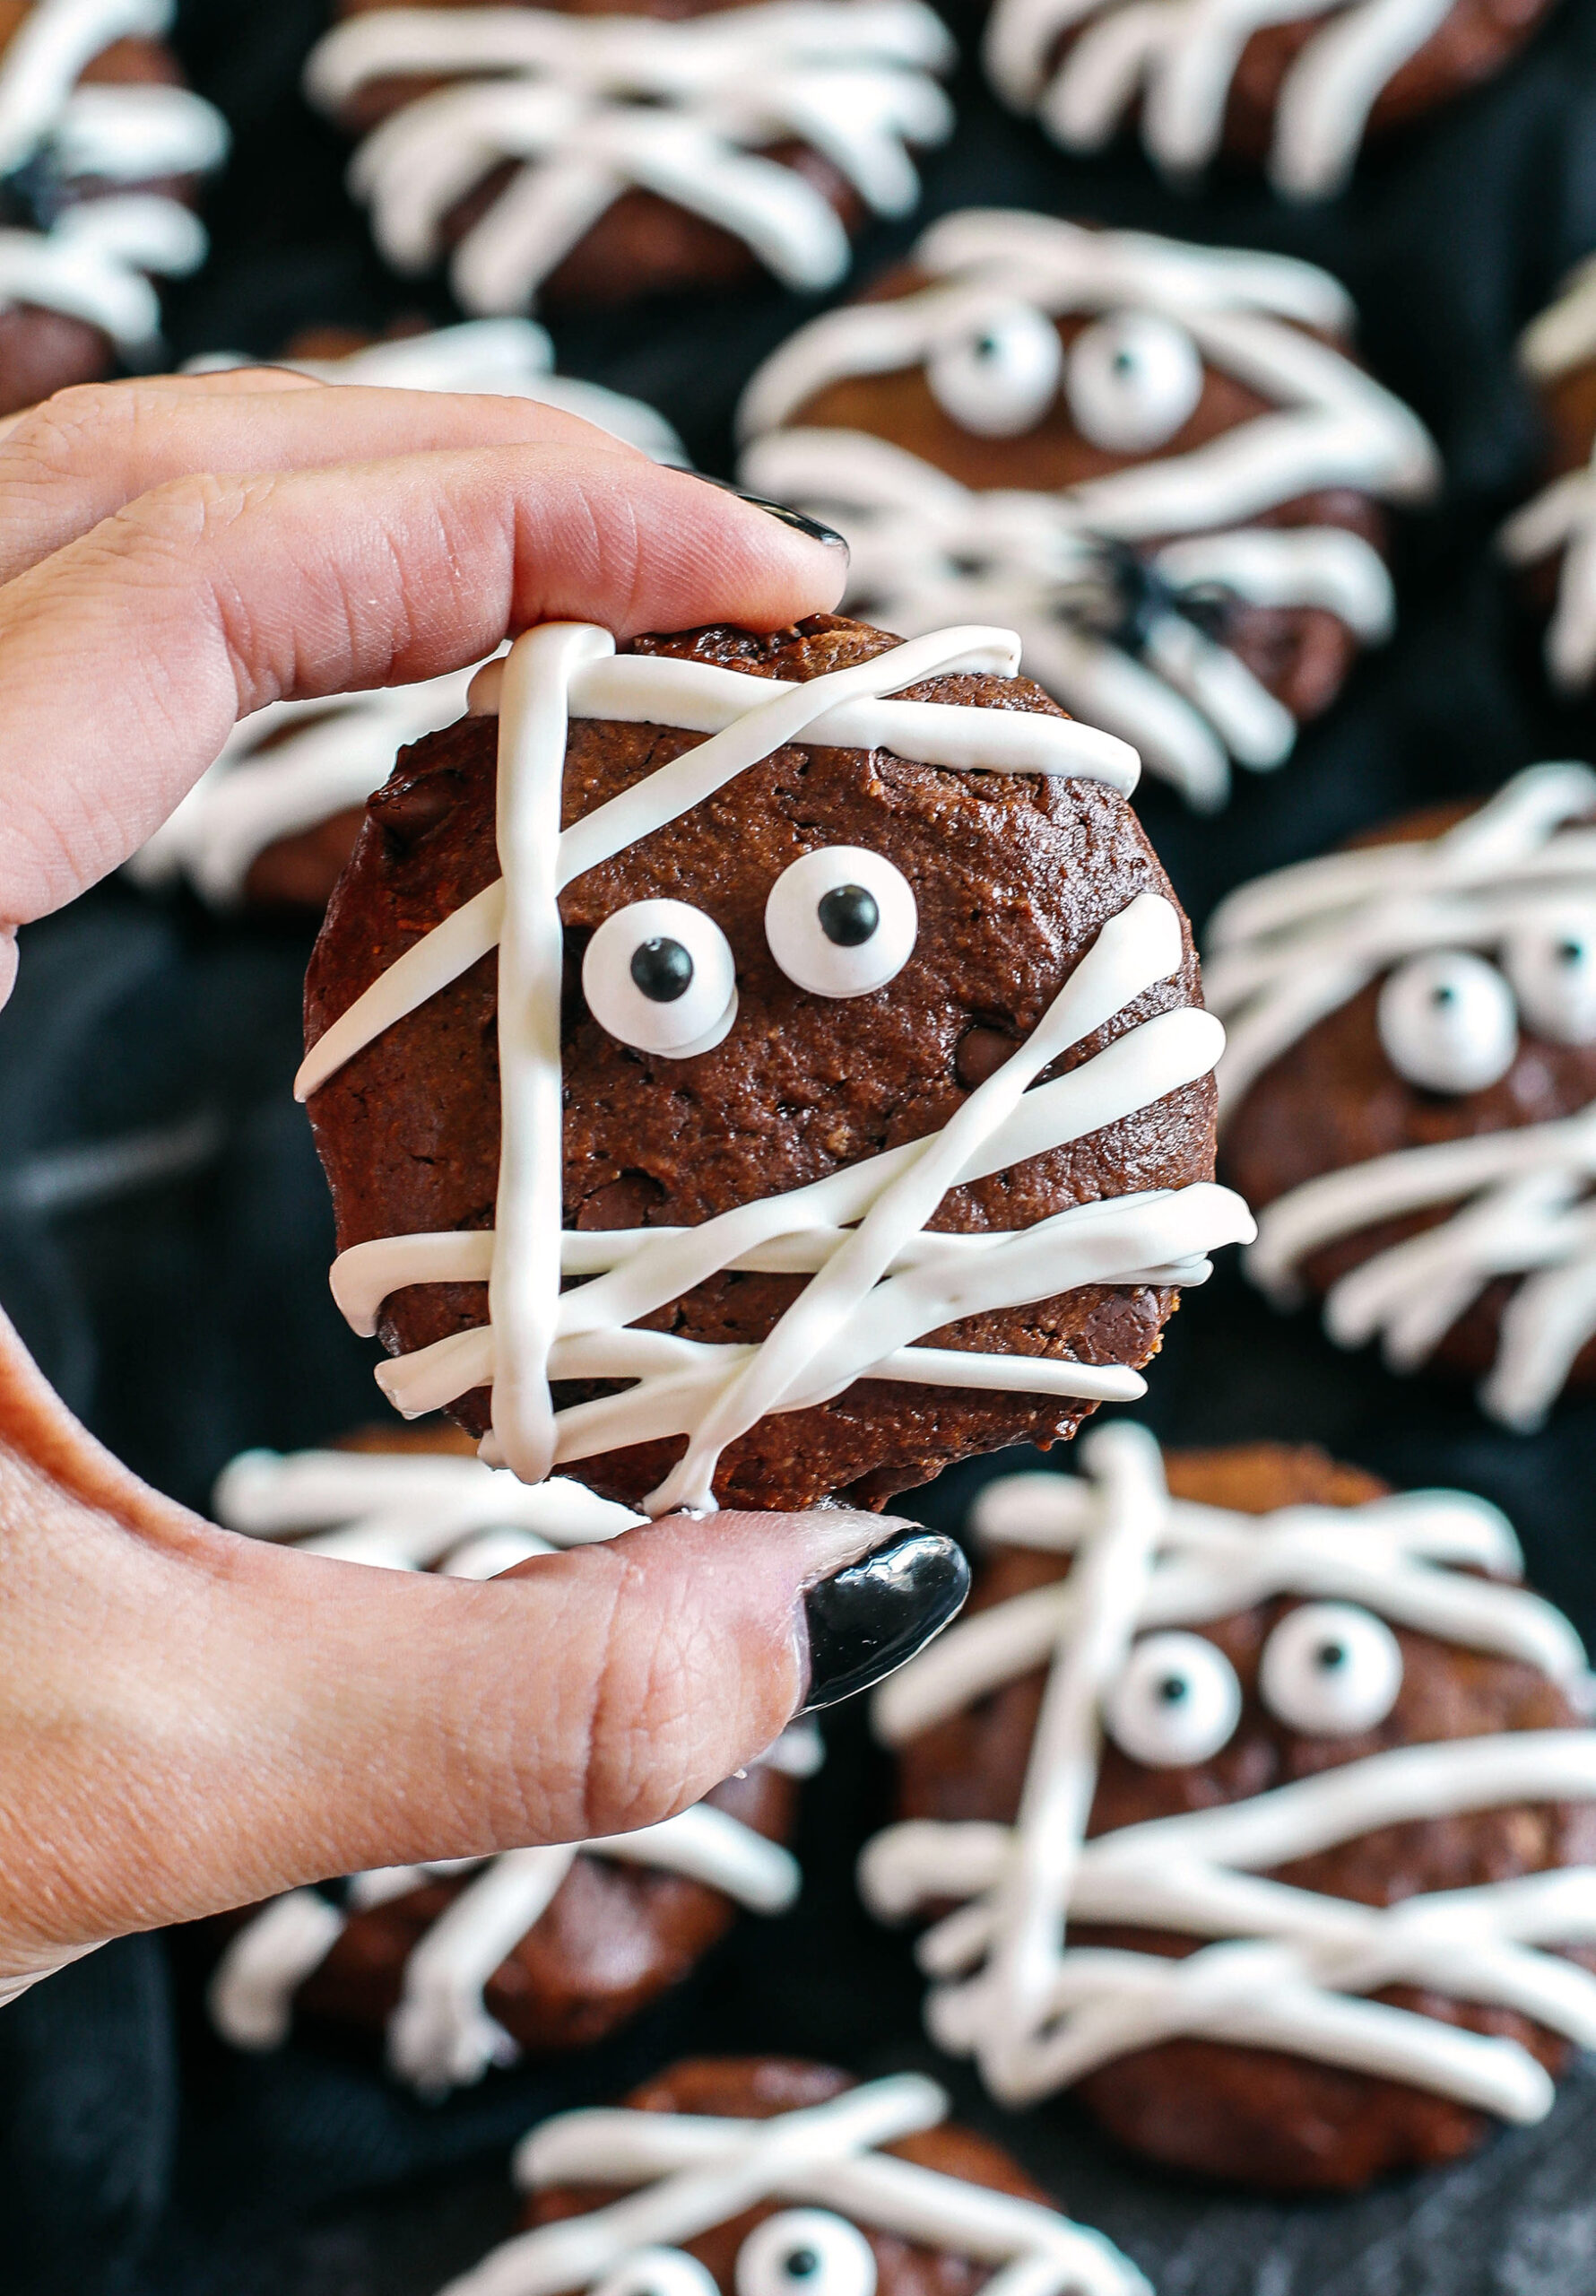 Get festive this Halloween with these delicious Chocolate Mummy Cookies!  Made healthier with zero butter, oil or refined sugar and are the perfect spooky treat your kids will love!